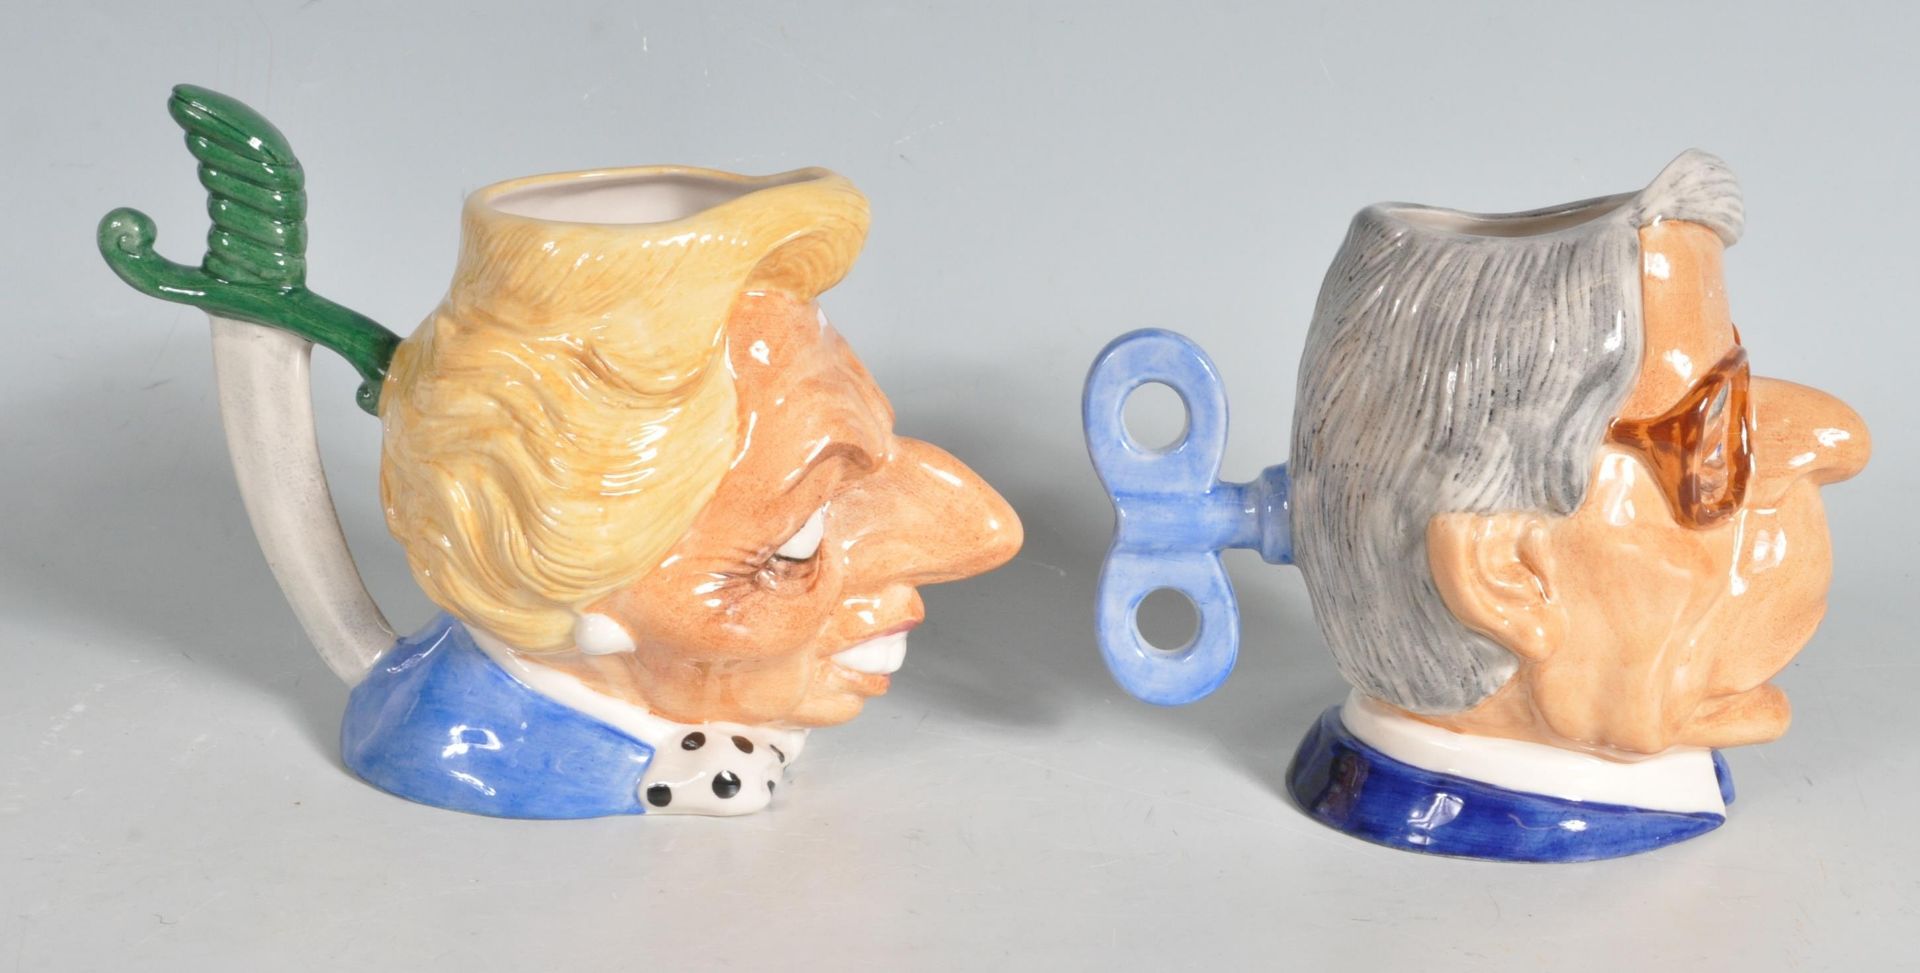 TWO LATE 20TH CENTURY VINTAGE CERAMIC KEVIN FRANCIS TOBY JUGS - Image 3 of 8